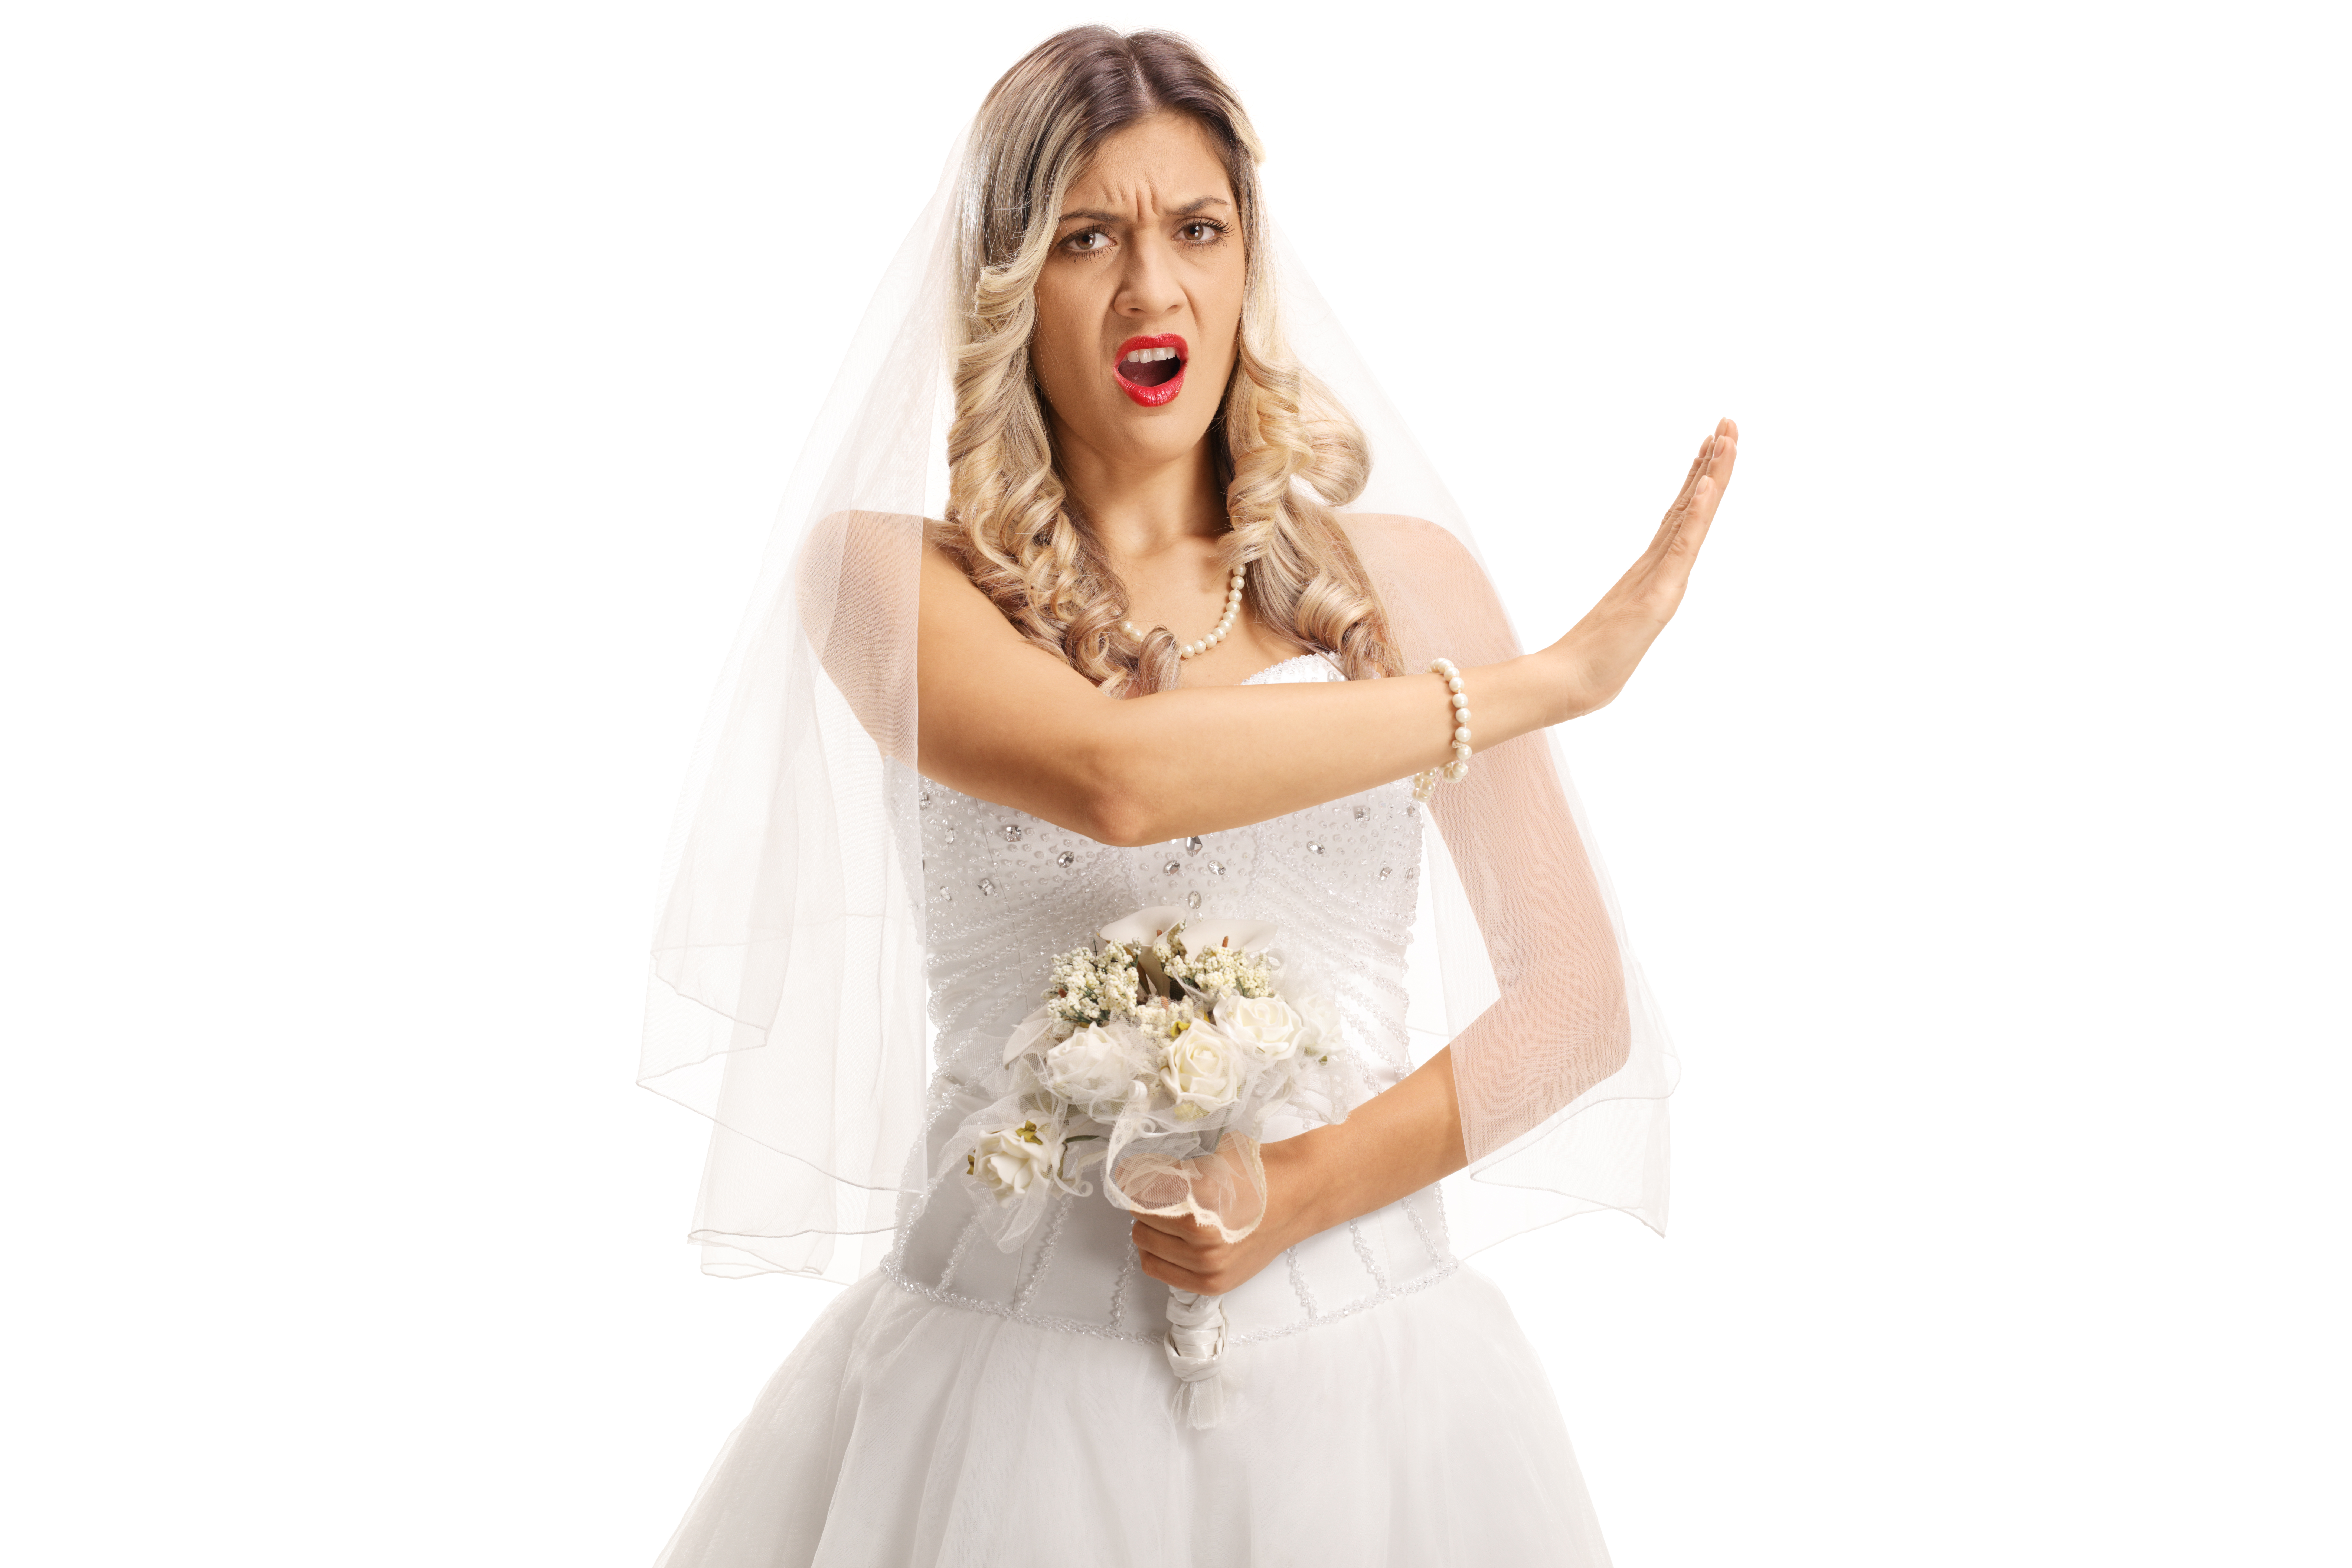 An angry bride telling someone off | Source: Shutterstock